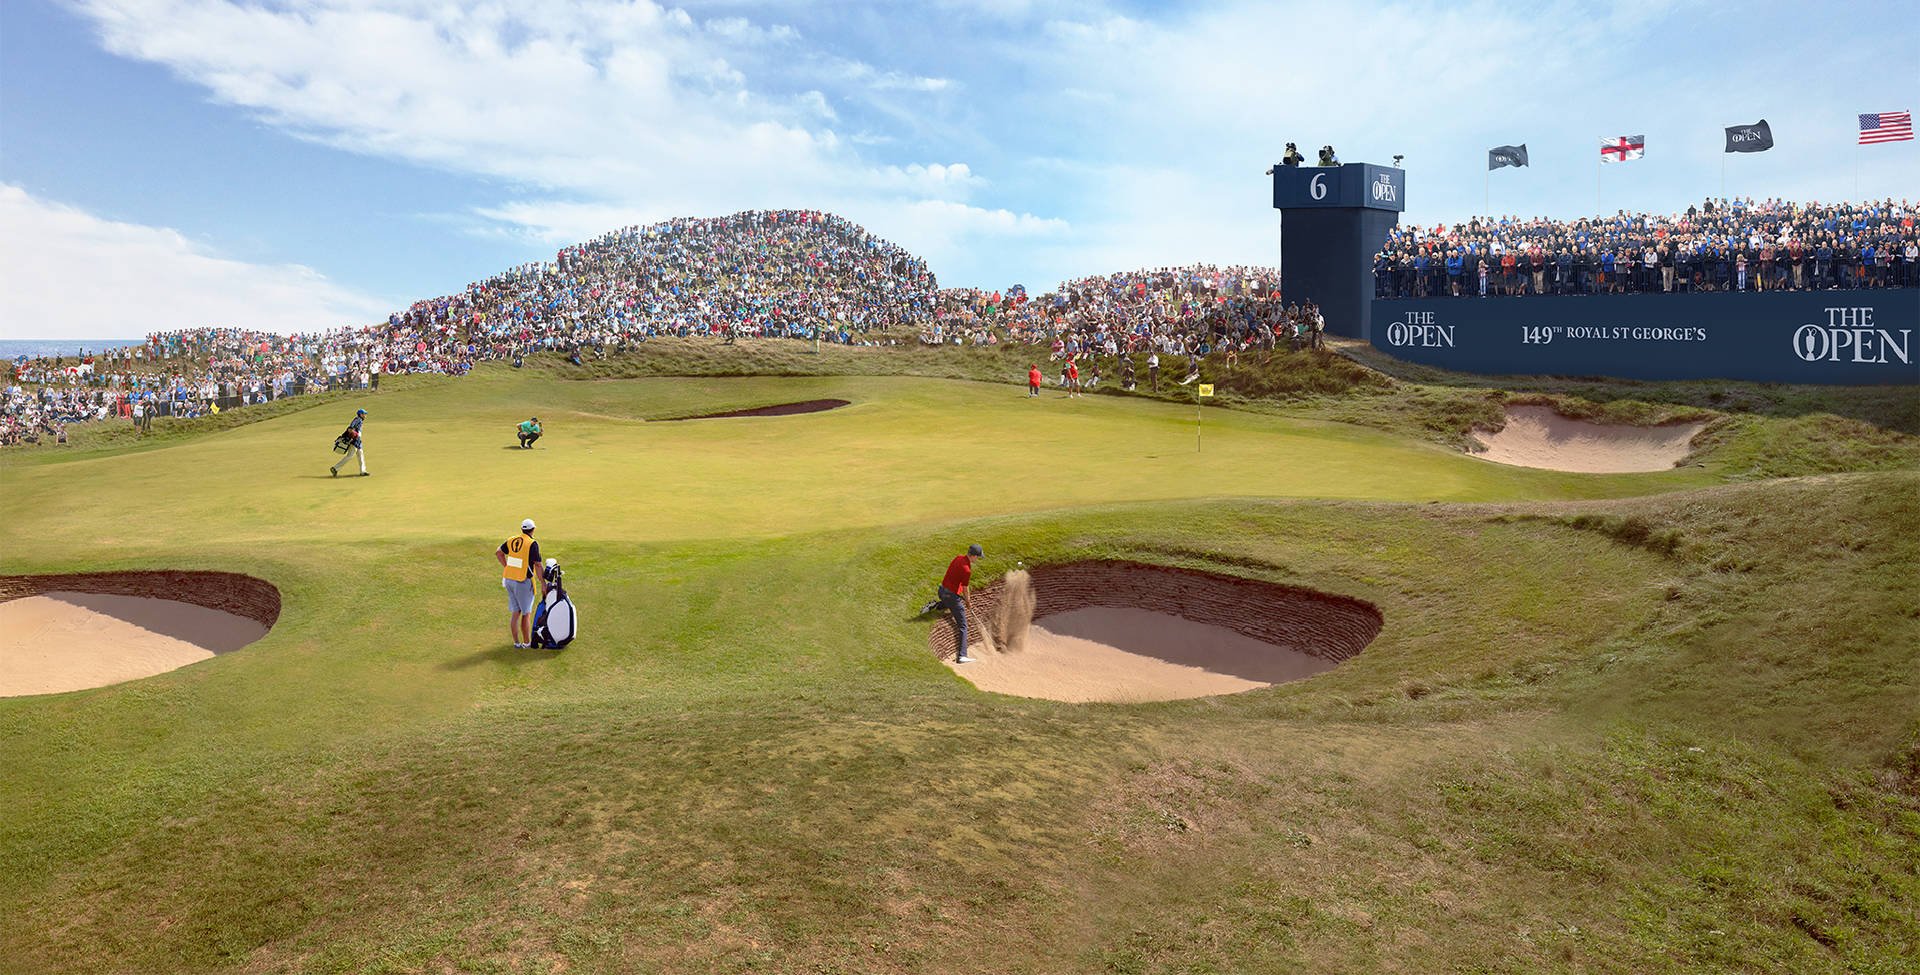 The 149th Open at Royal St George's England